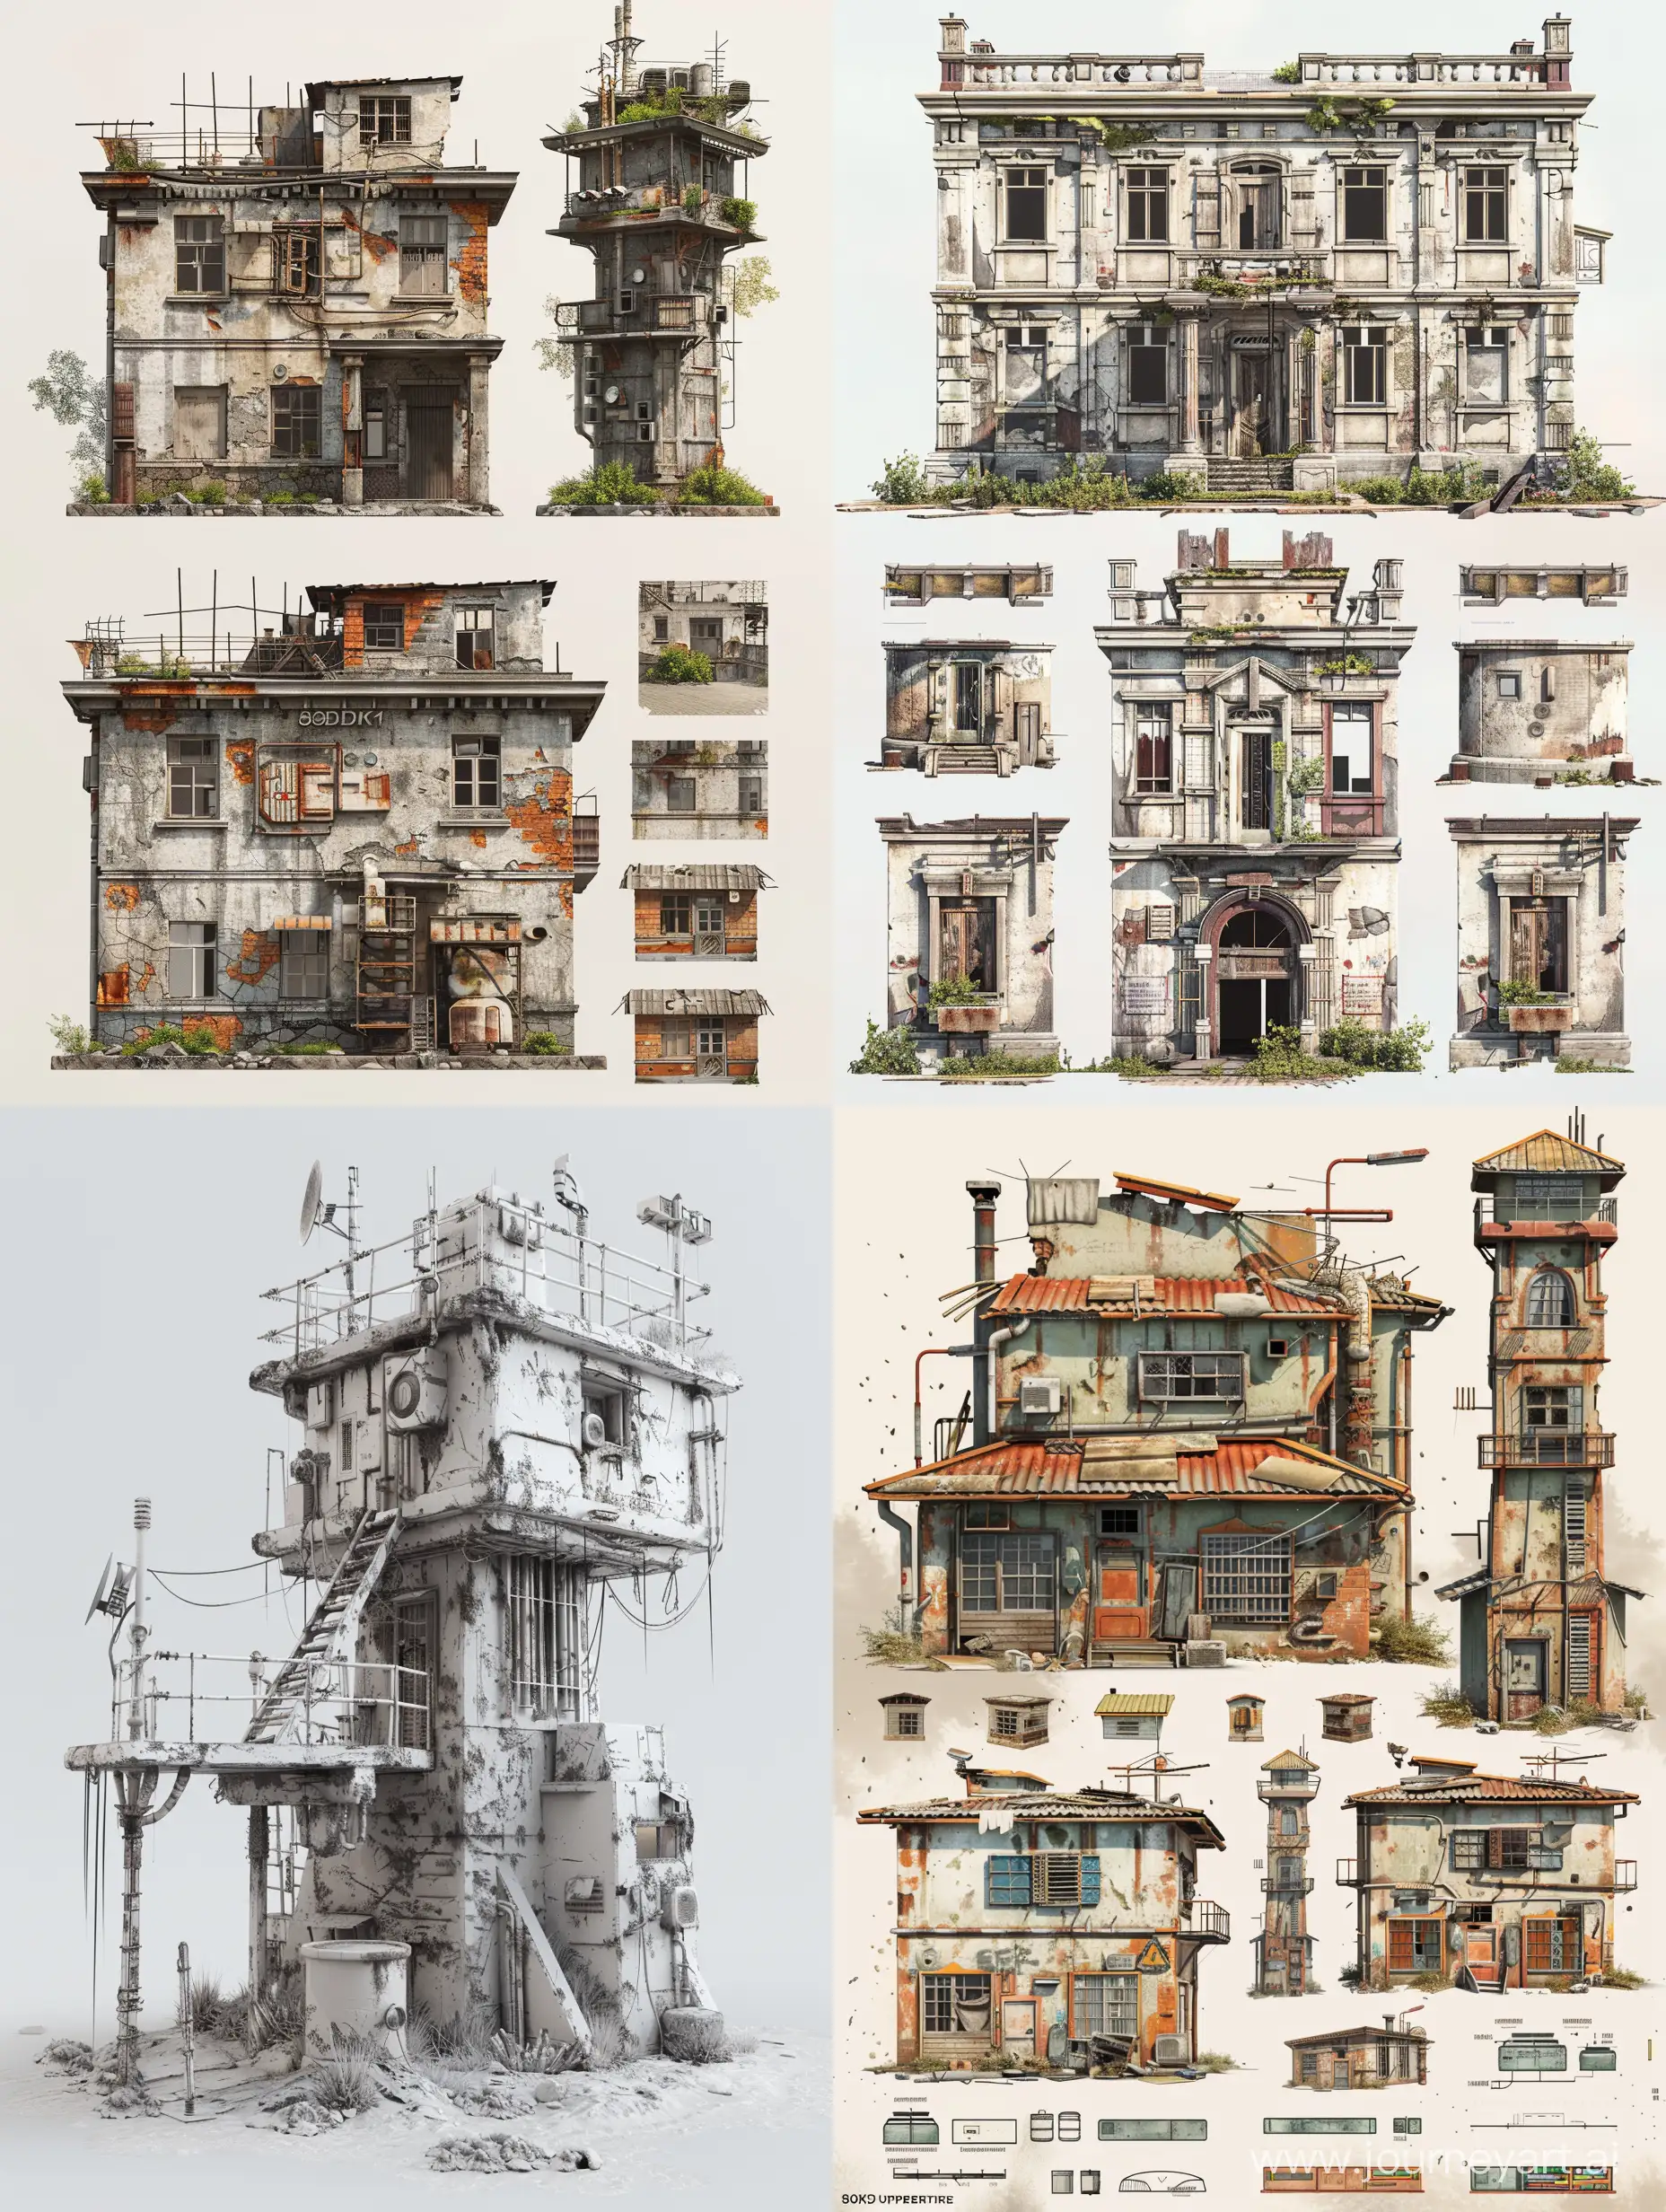 PostApocalyptic-Cyberpunk-Urban-Landscape-with-Russian-Style-House-and-Tower-of-the-Future